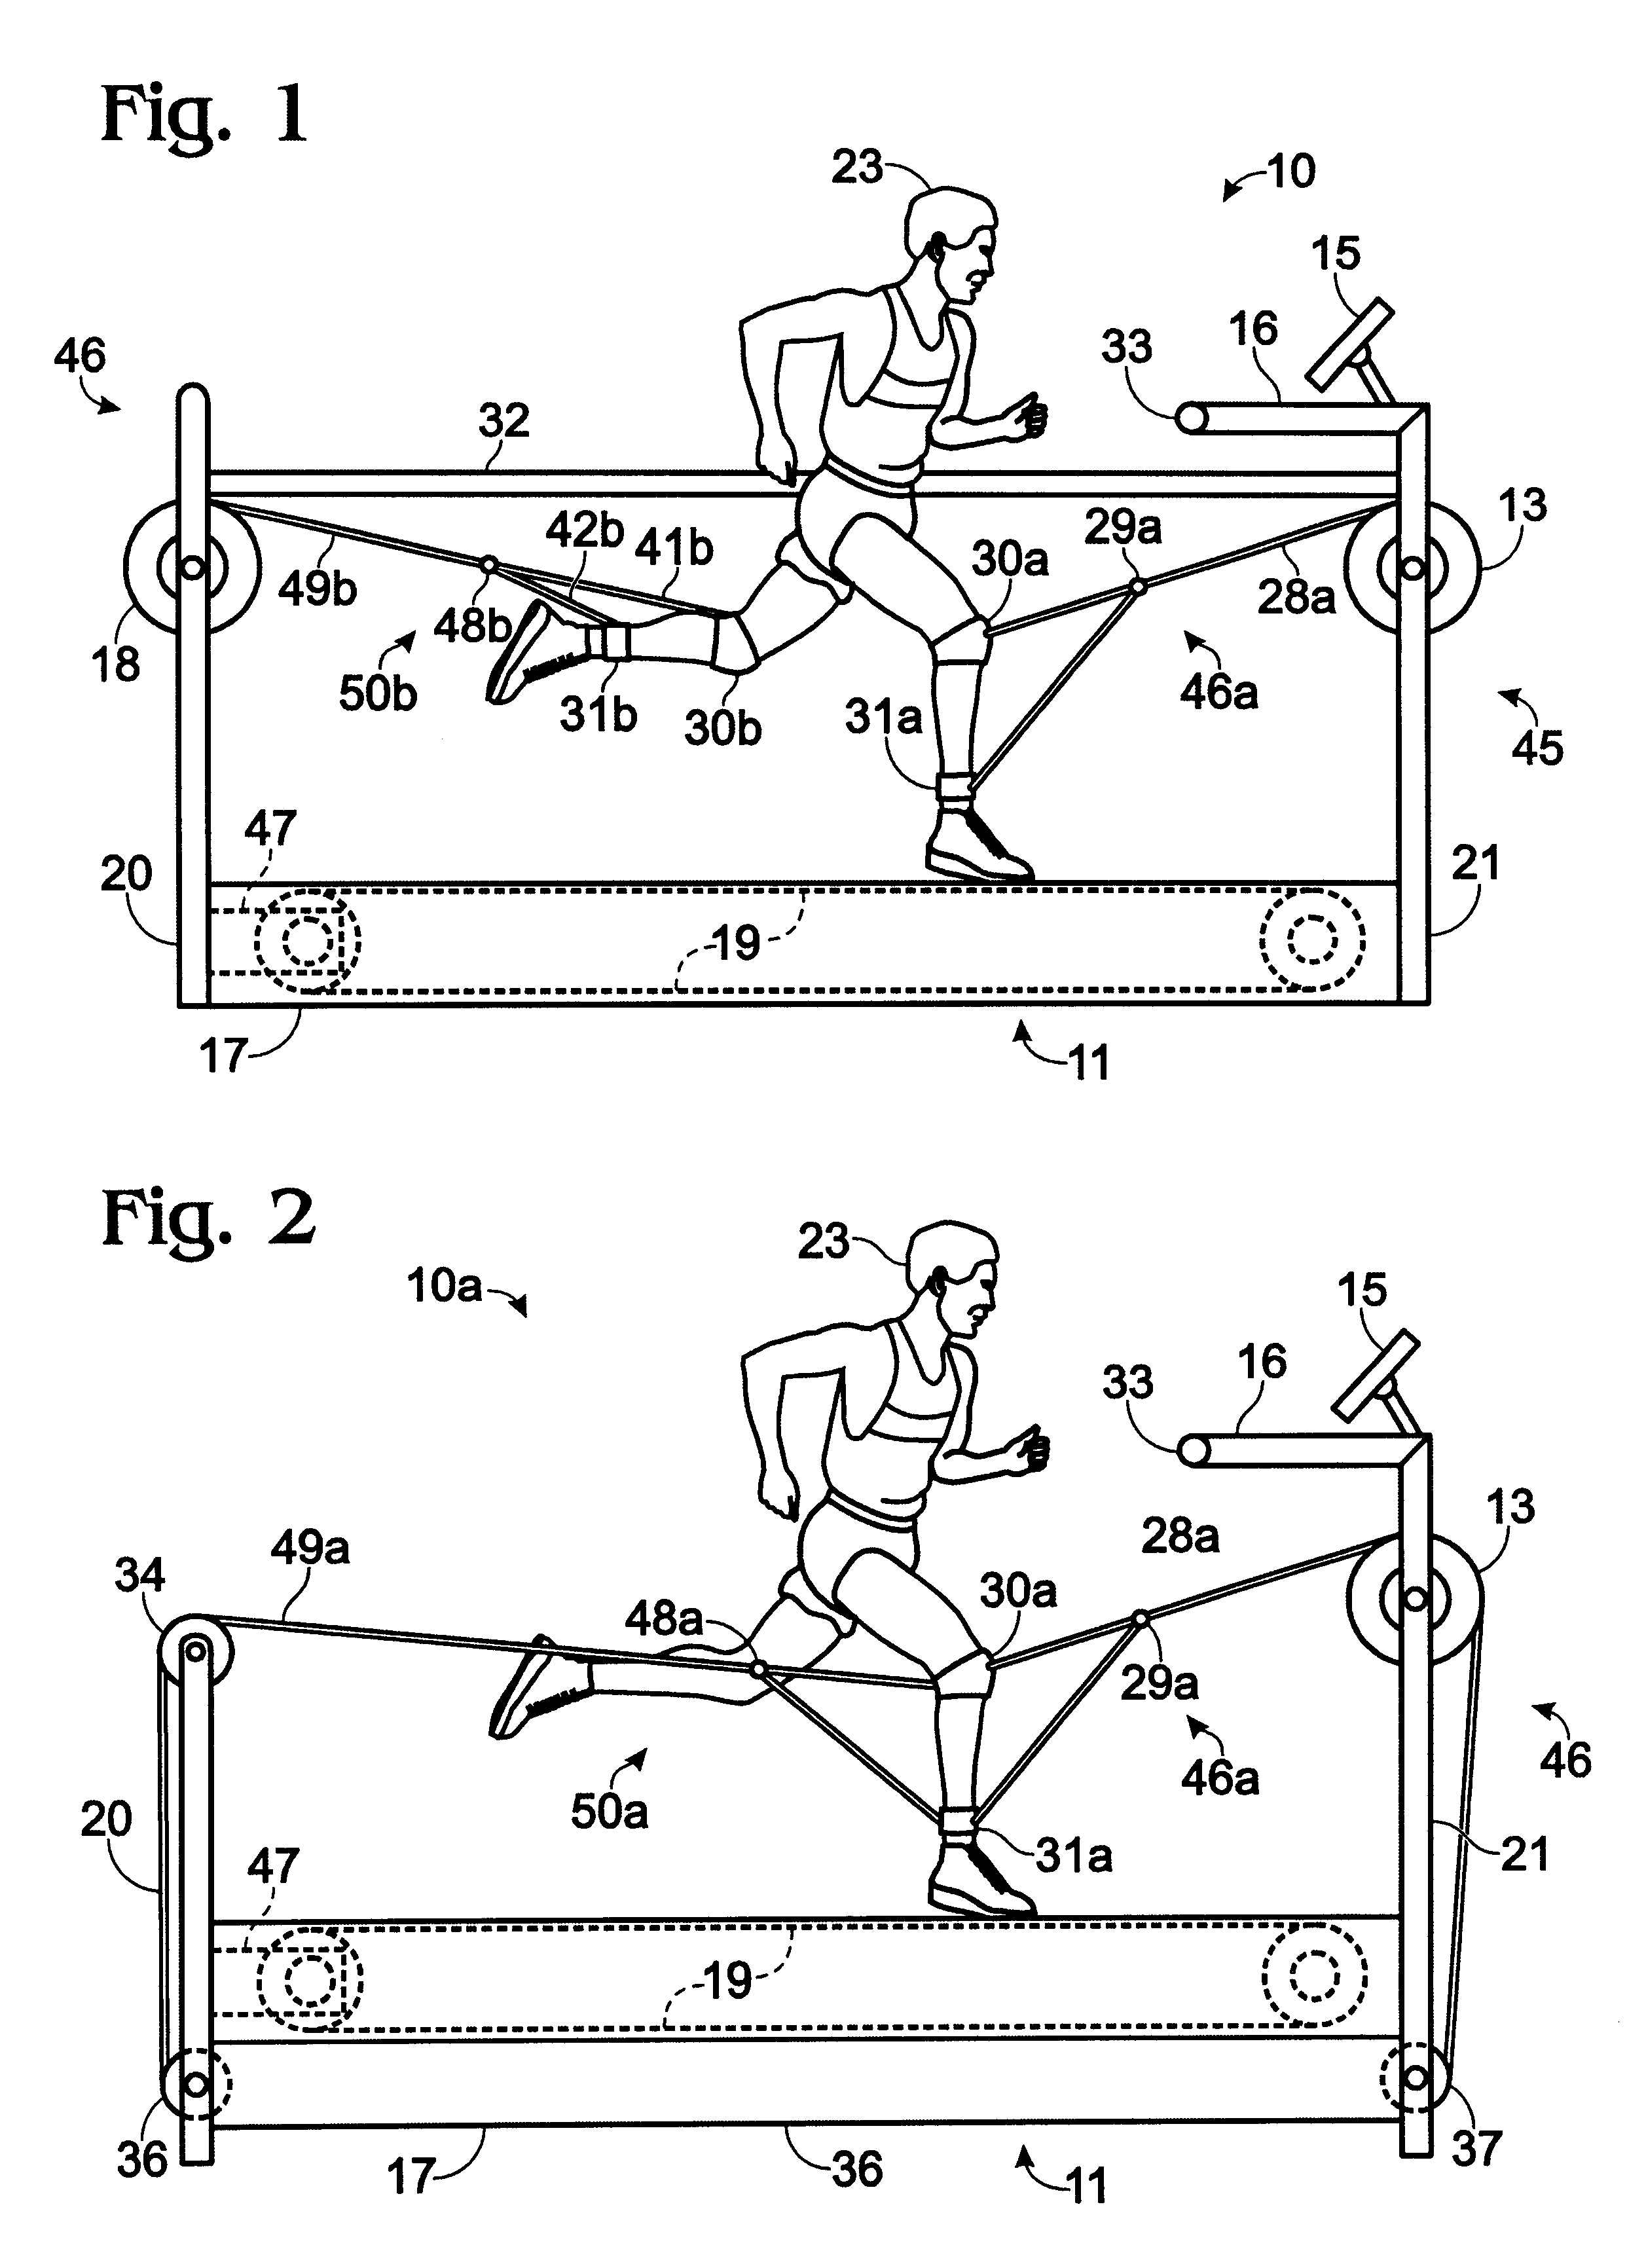 Apparatus using multi-directional resistance in exercise equipment